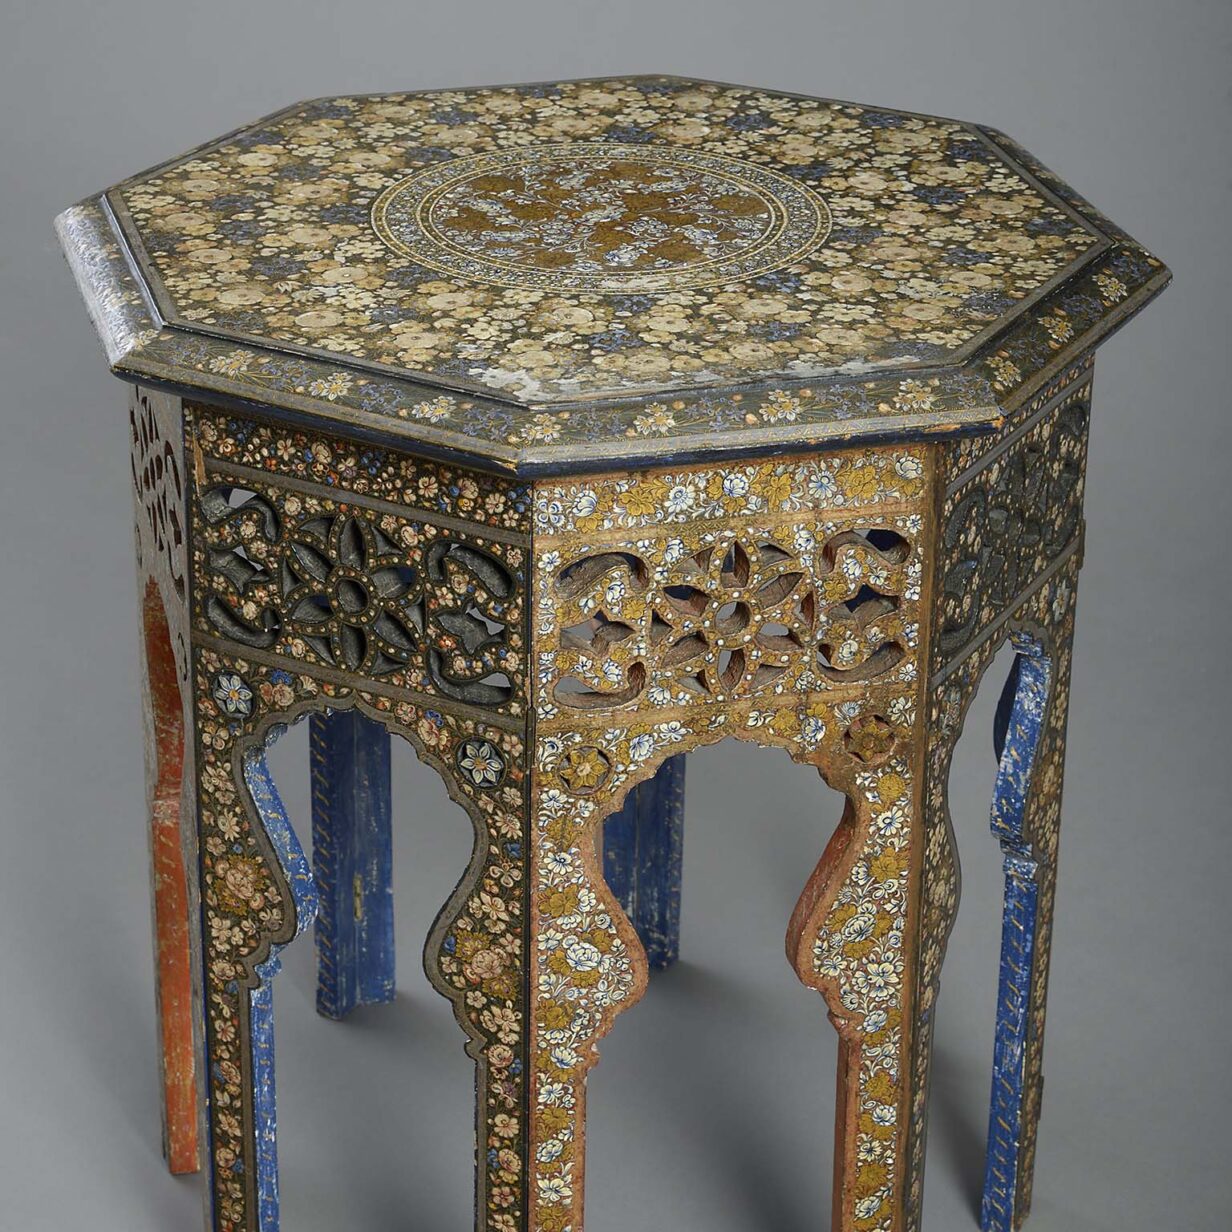 19th century kashmiri lacquer low table